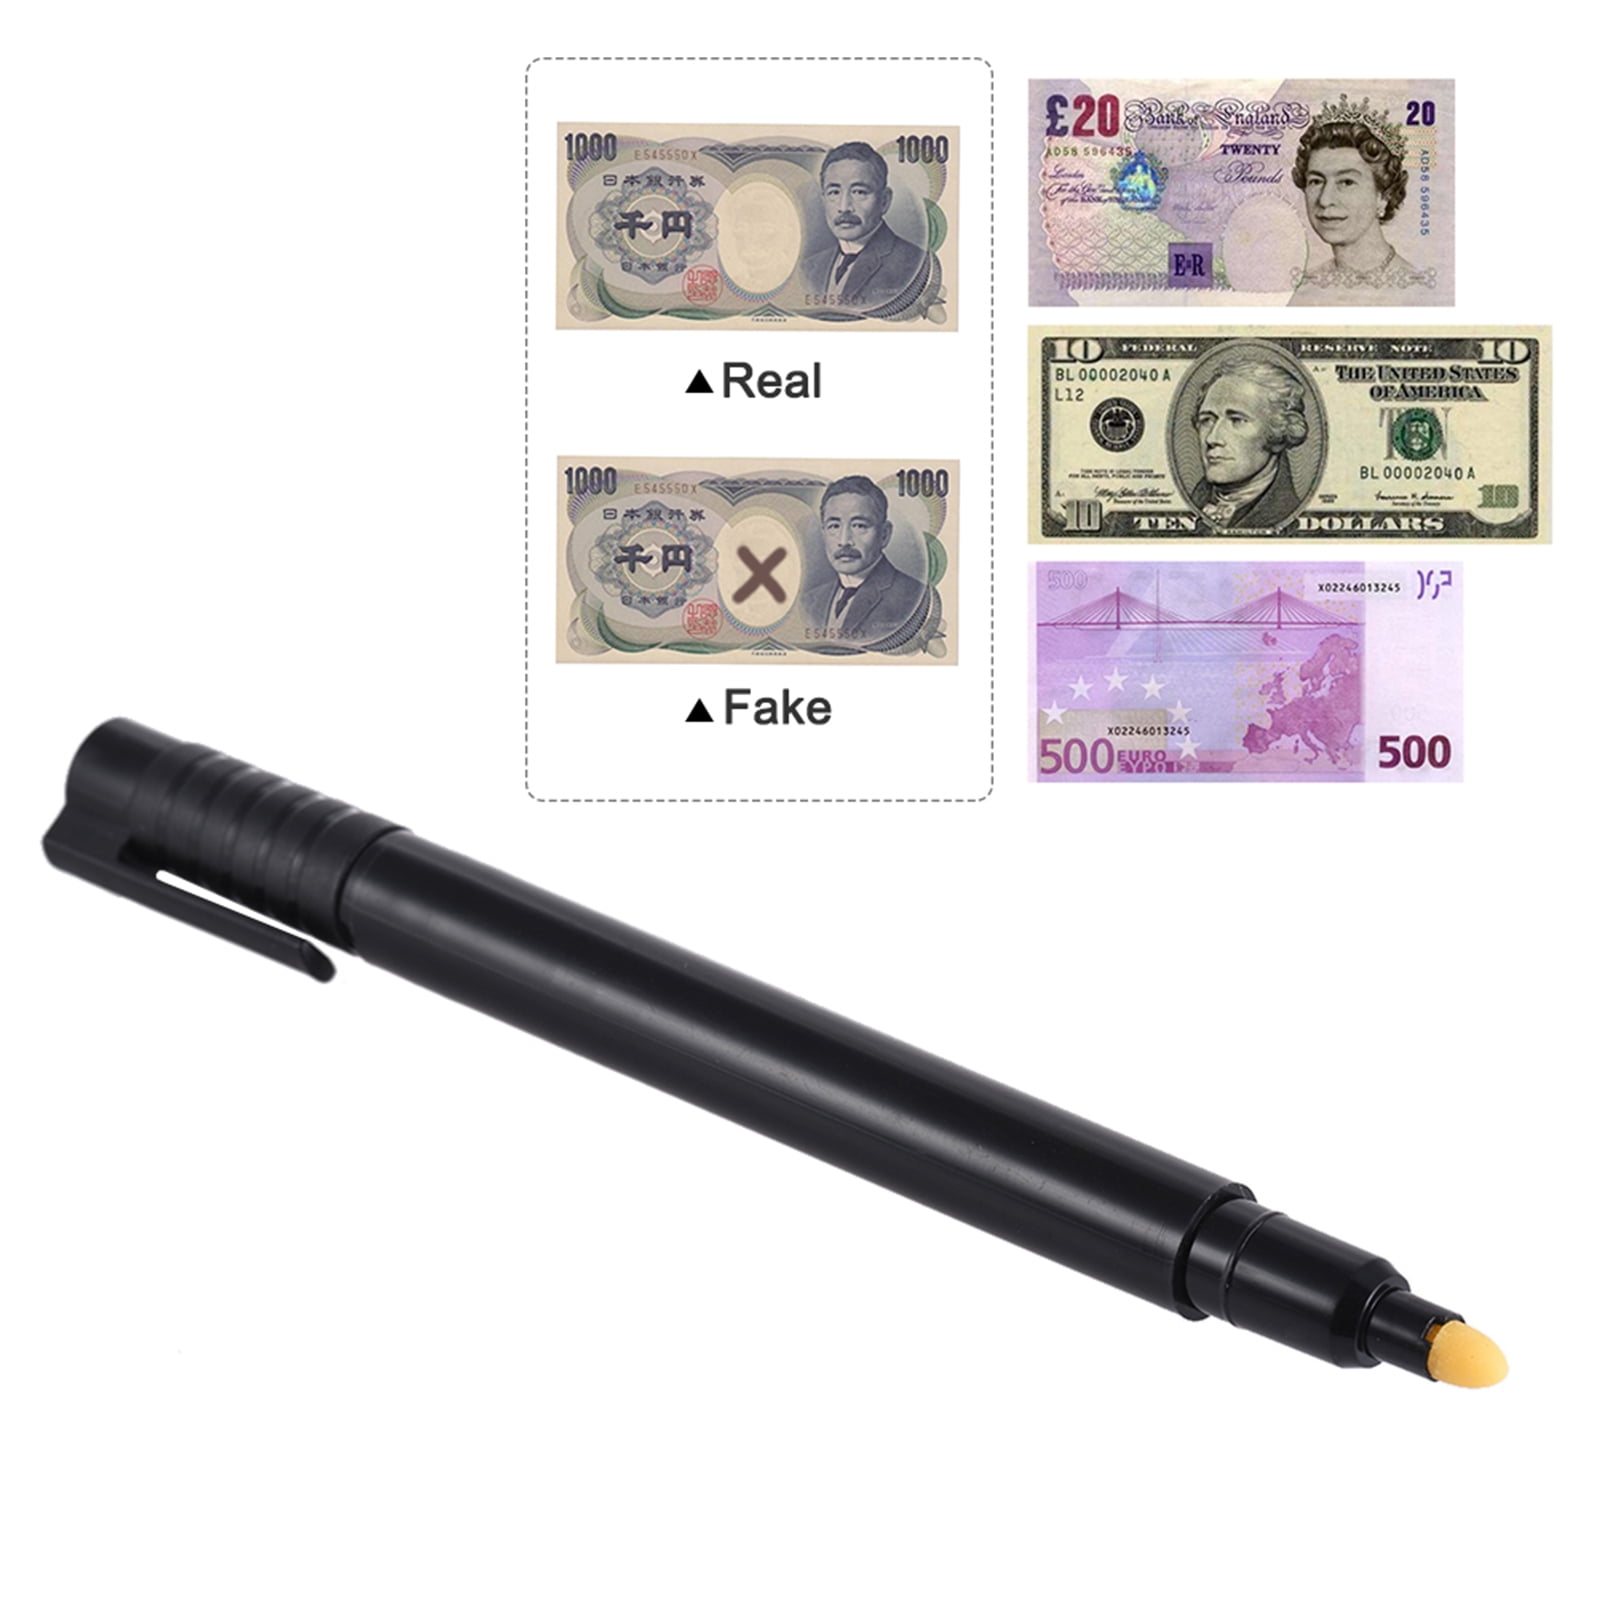 2x Money Currency Checker Counterfeit Detector Marker Fake Banknotes Tester Pen 